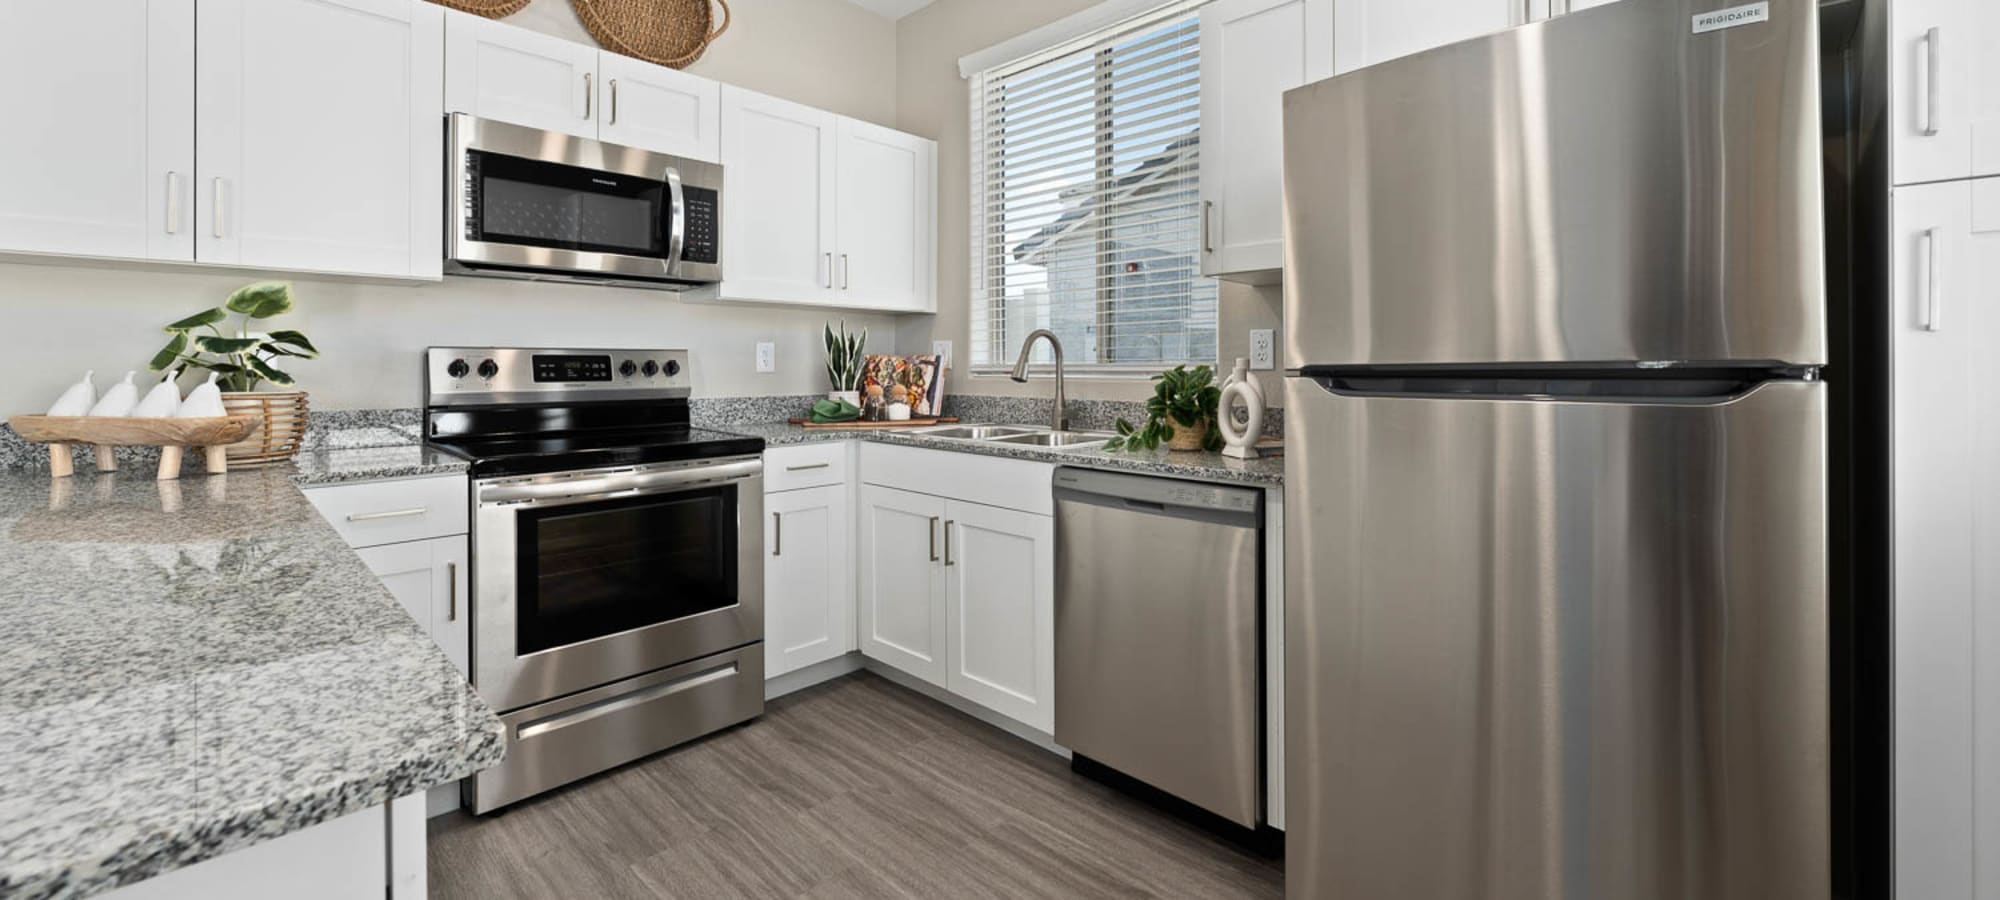 Modern kitchen at Cottages at McDowell in Avondale, Arizona